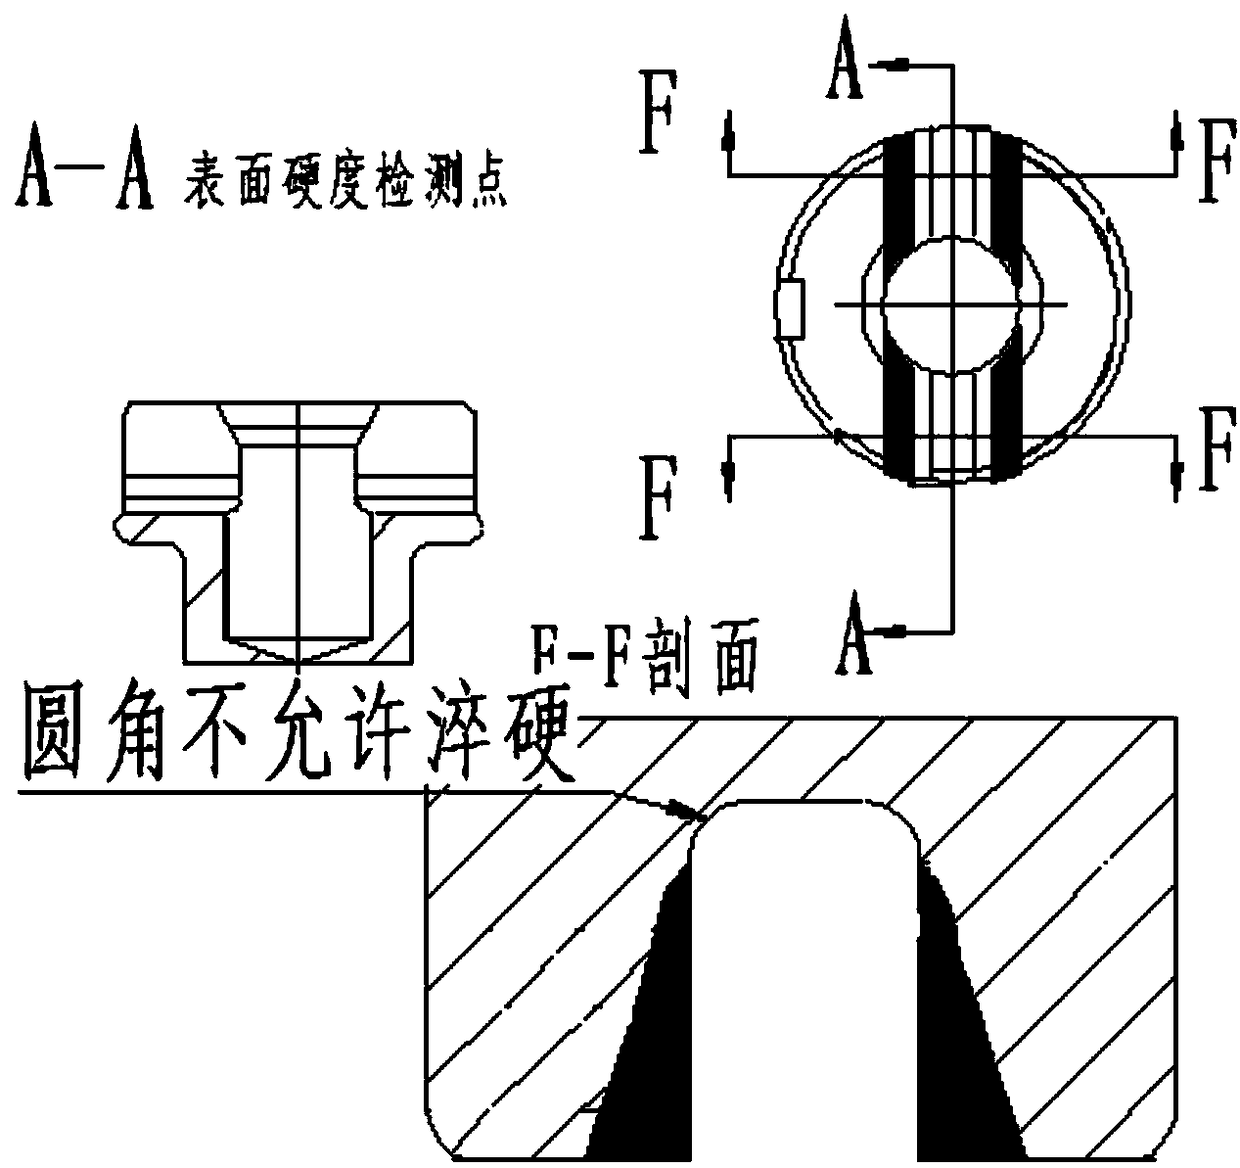 Induction heat treatment method for camshaft end piece